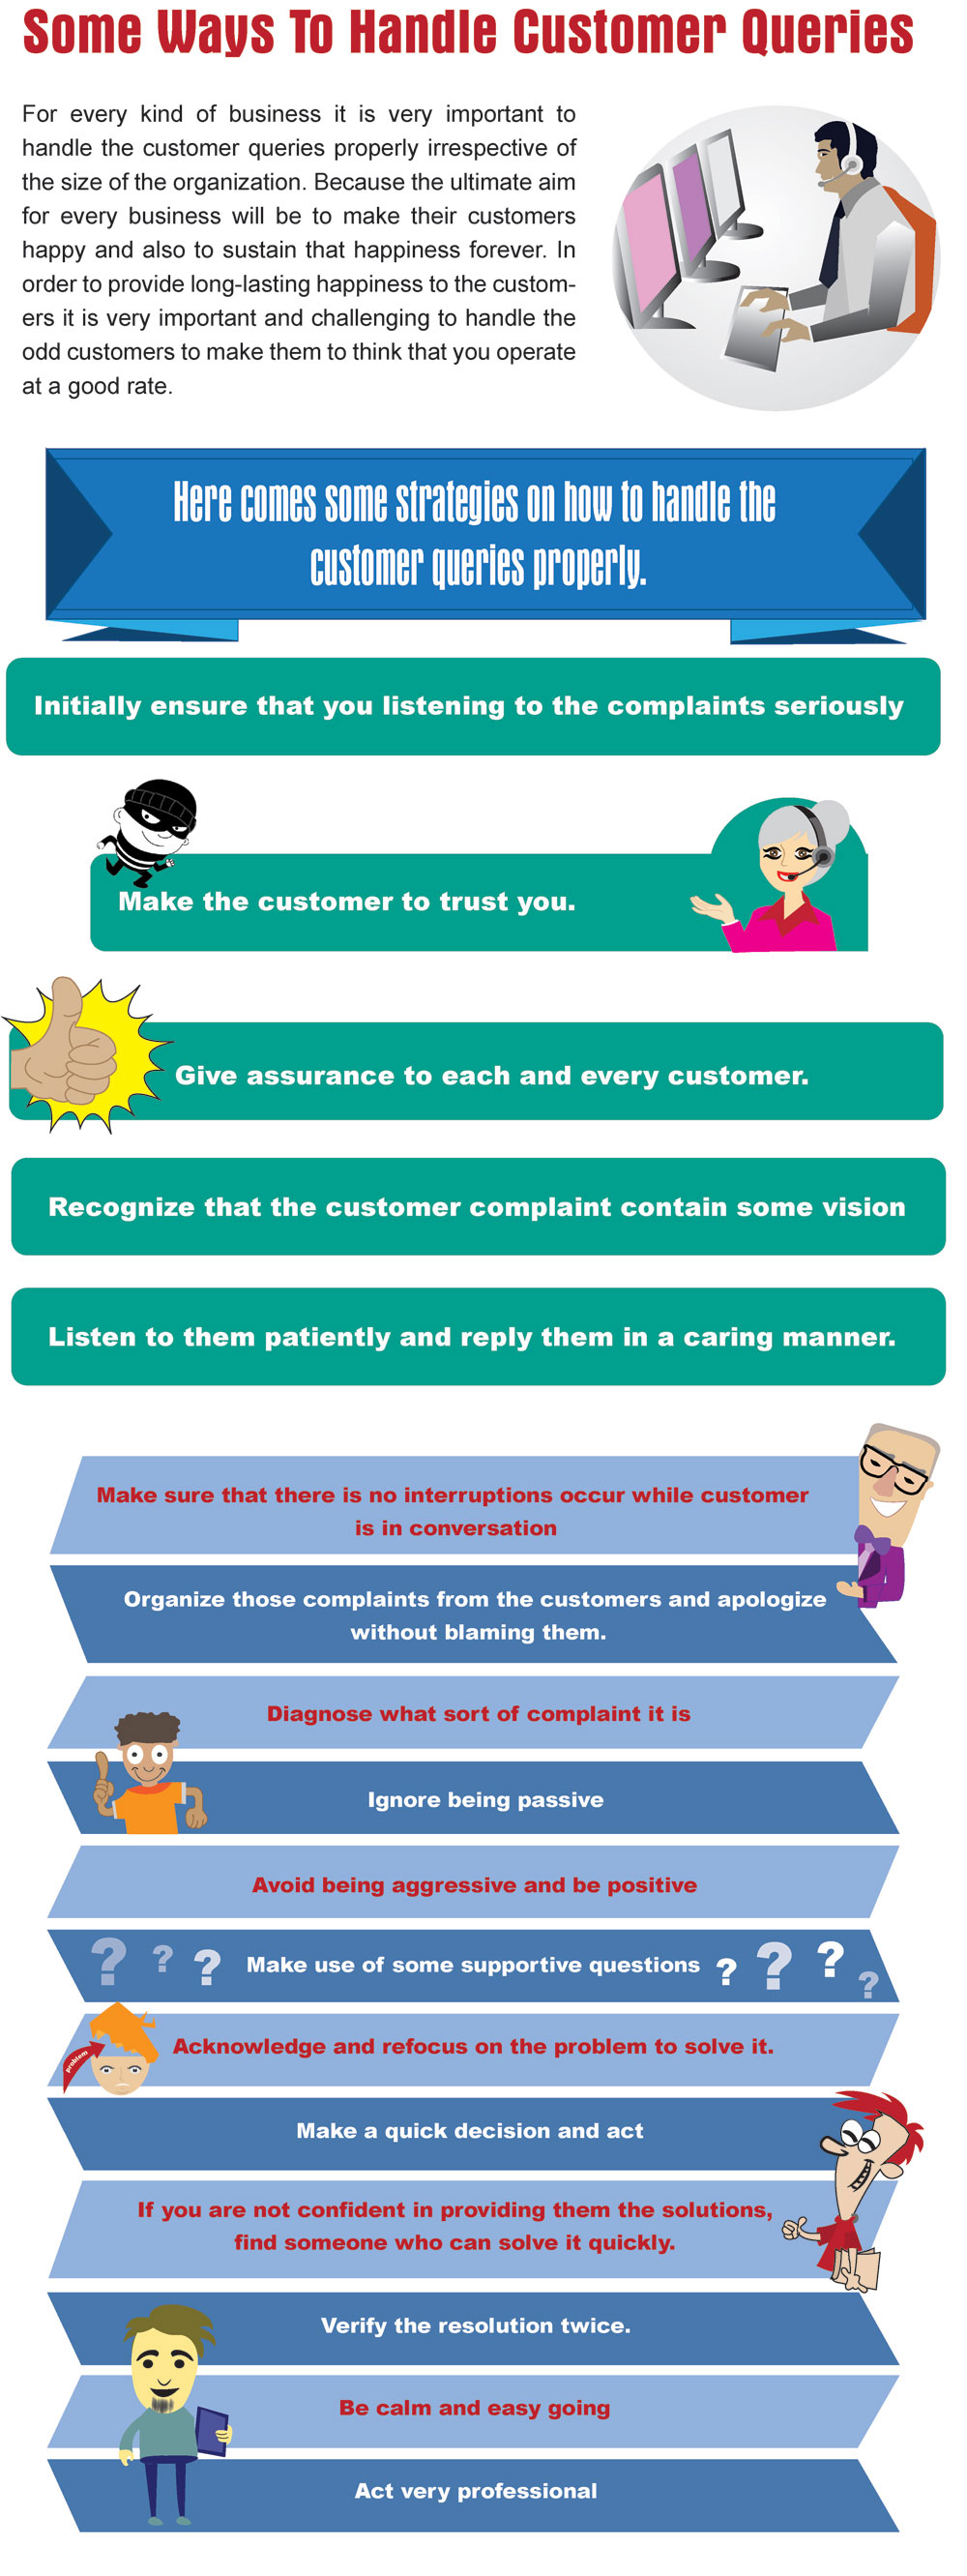 Handle Customer Queries - Infographic